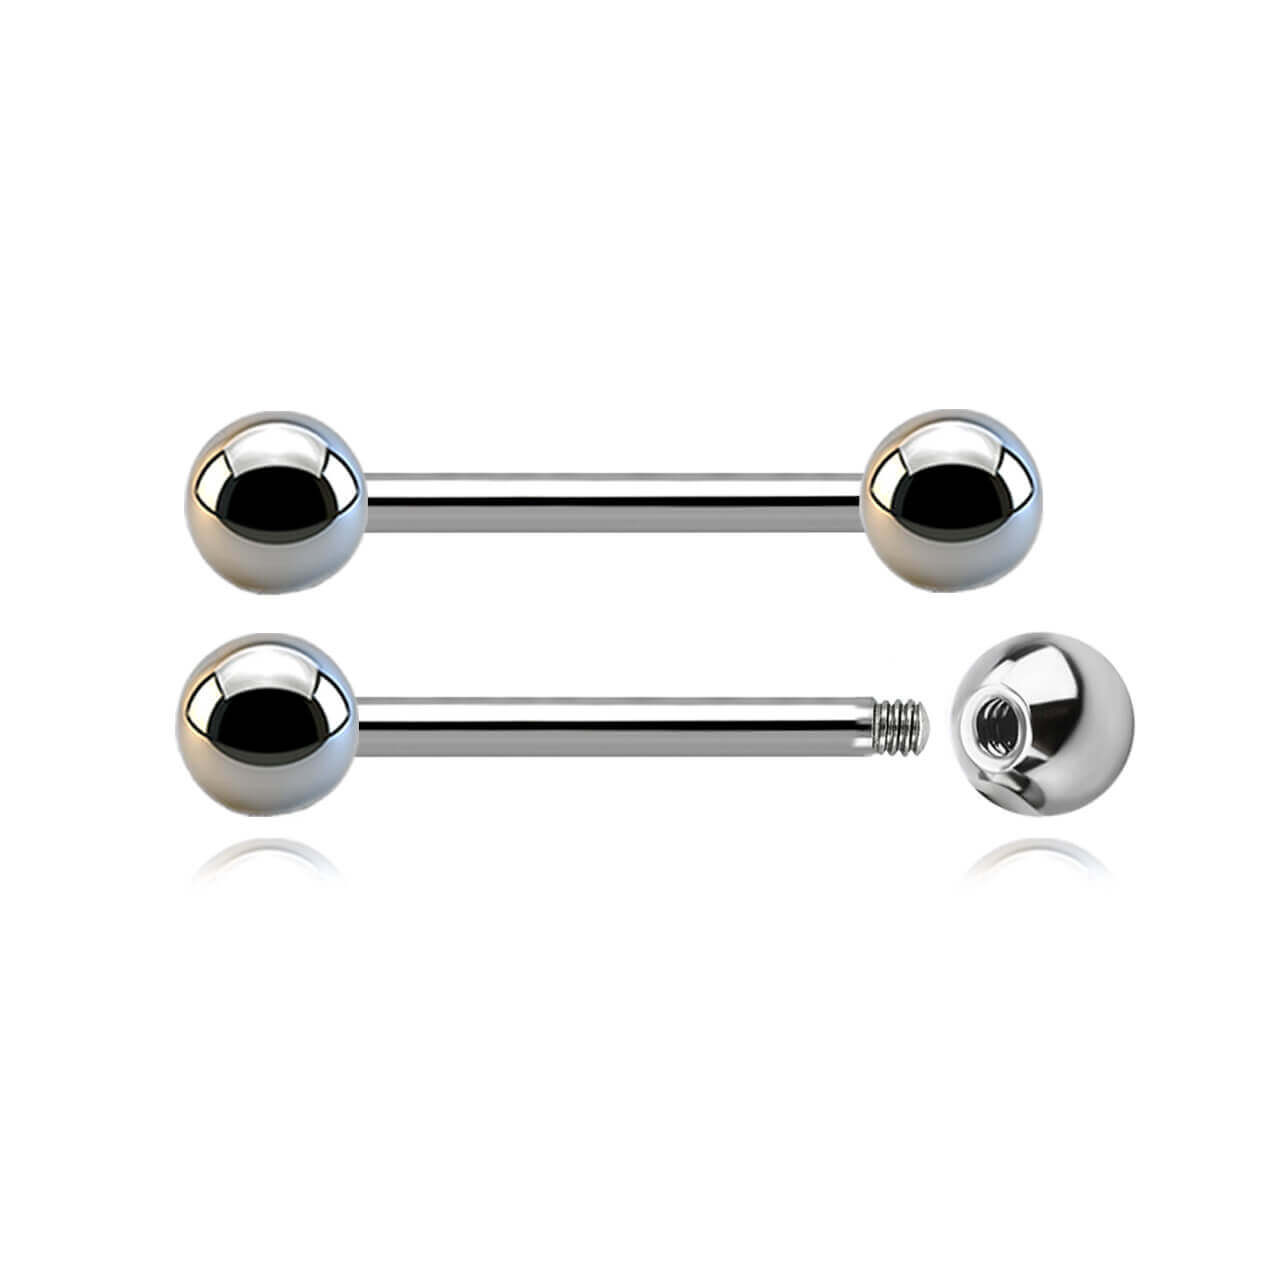 SBA16B5N Wholesale Pack of 25 surgical steel nipple barbells, Thickness 1.6mm, Ball size 5mm